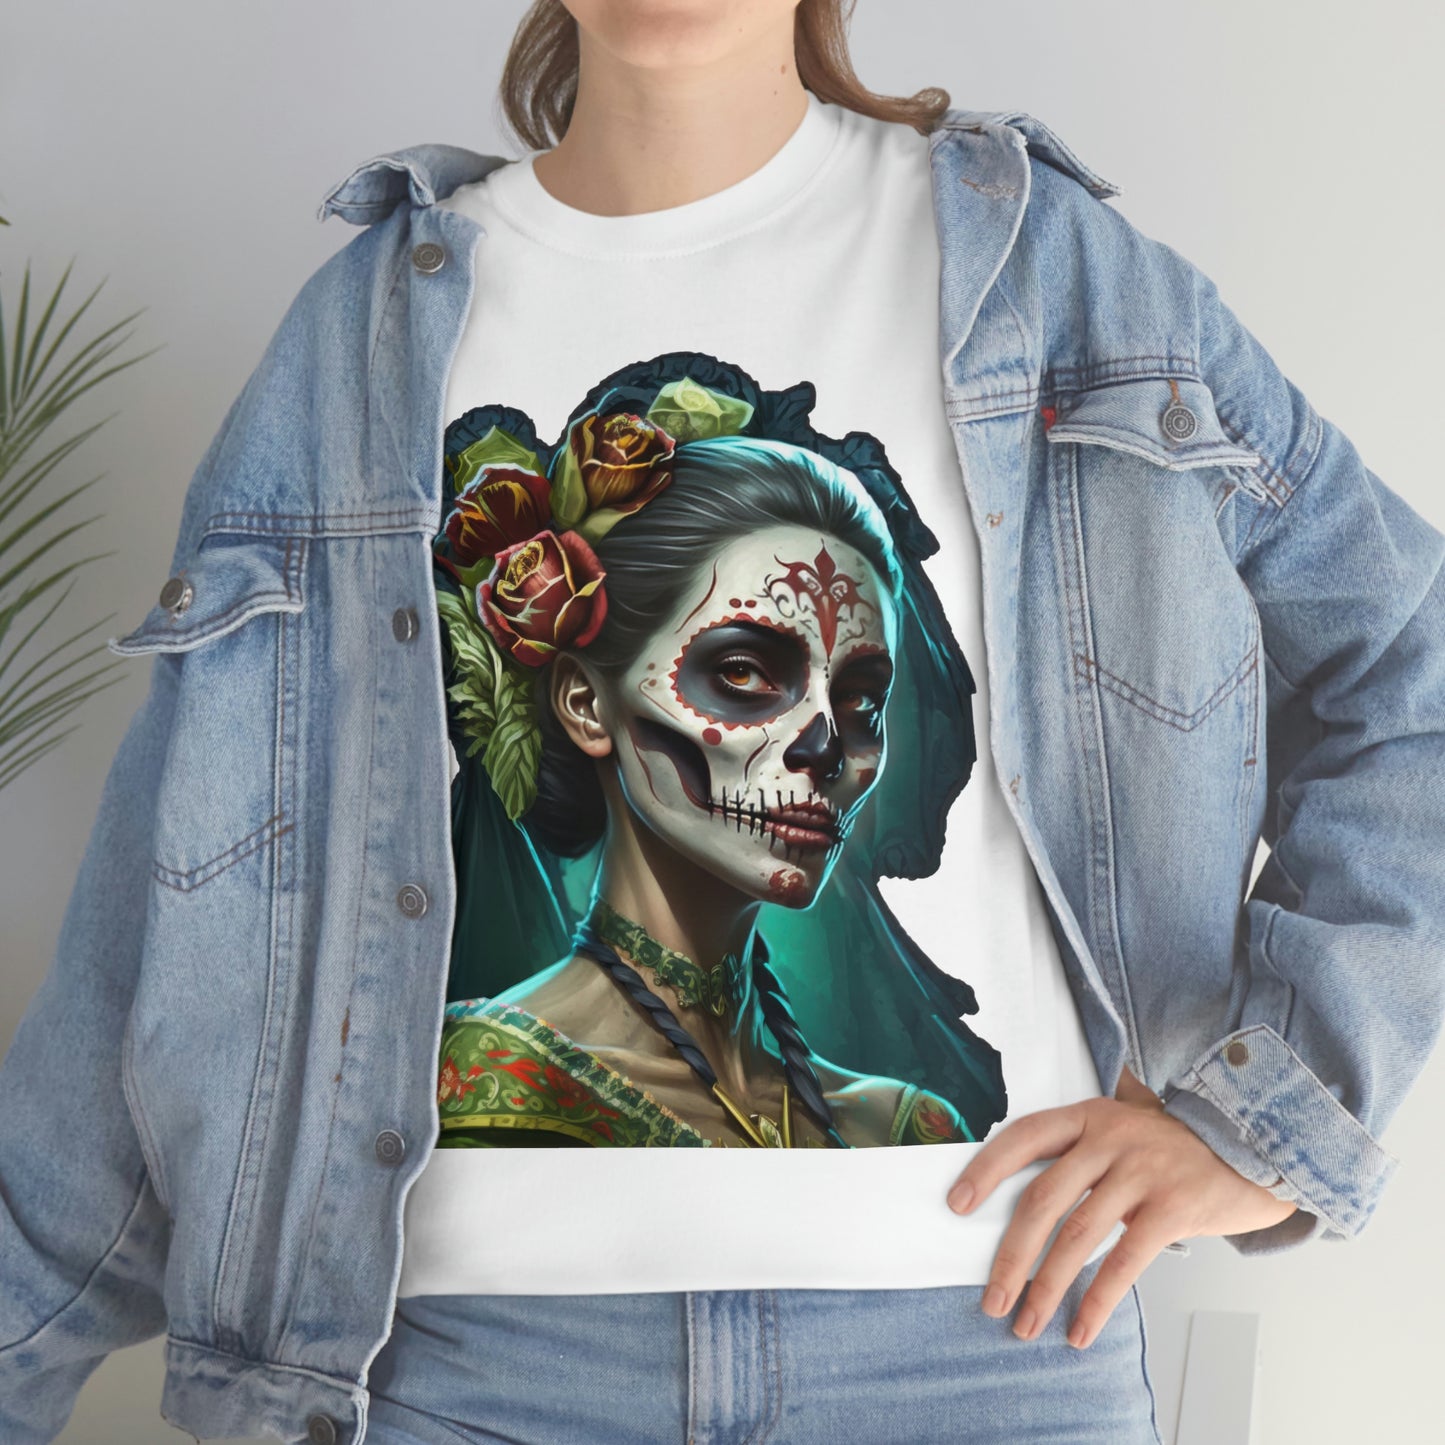 Day Of the Dead - Lady with Strife - Unisex Heavy Cotton Tee 34037